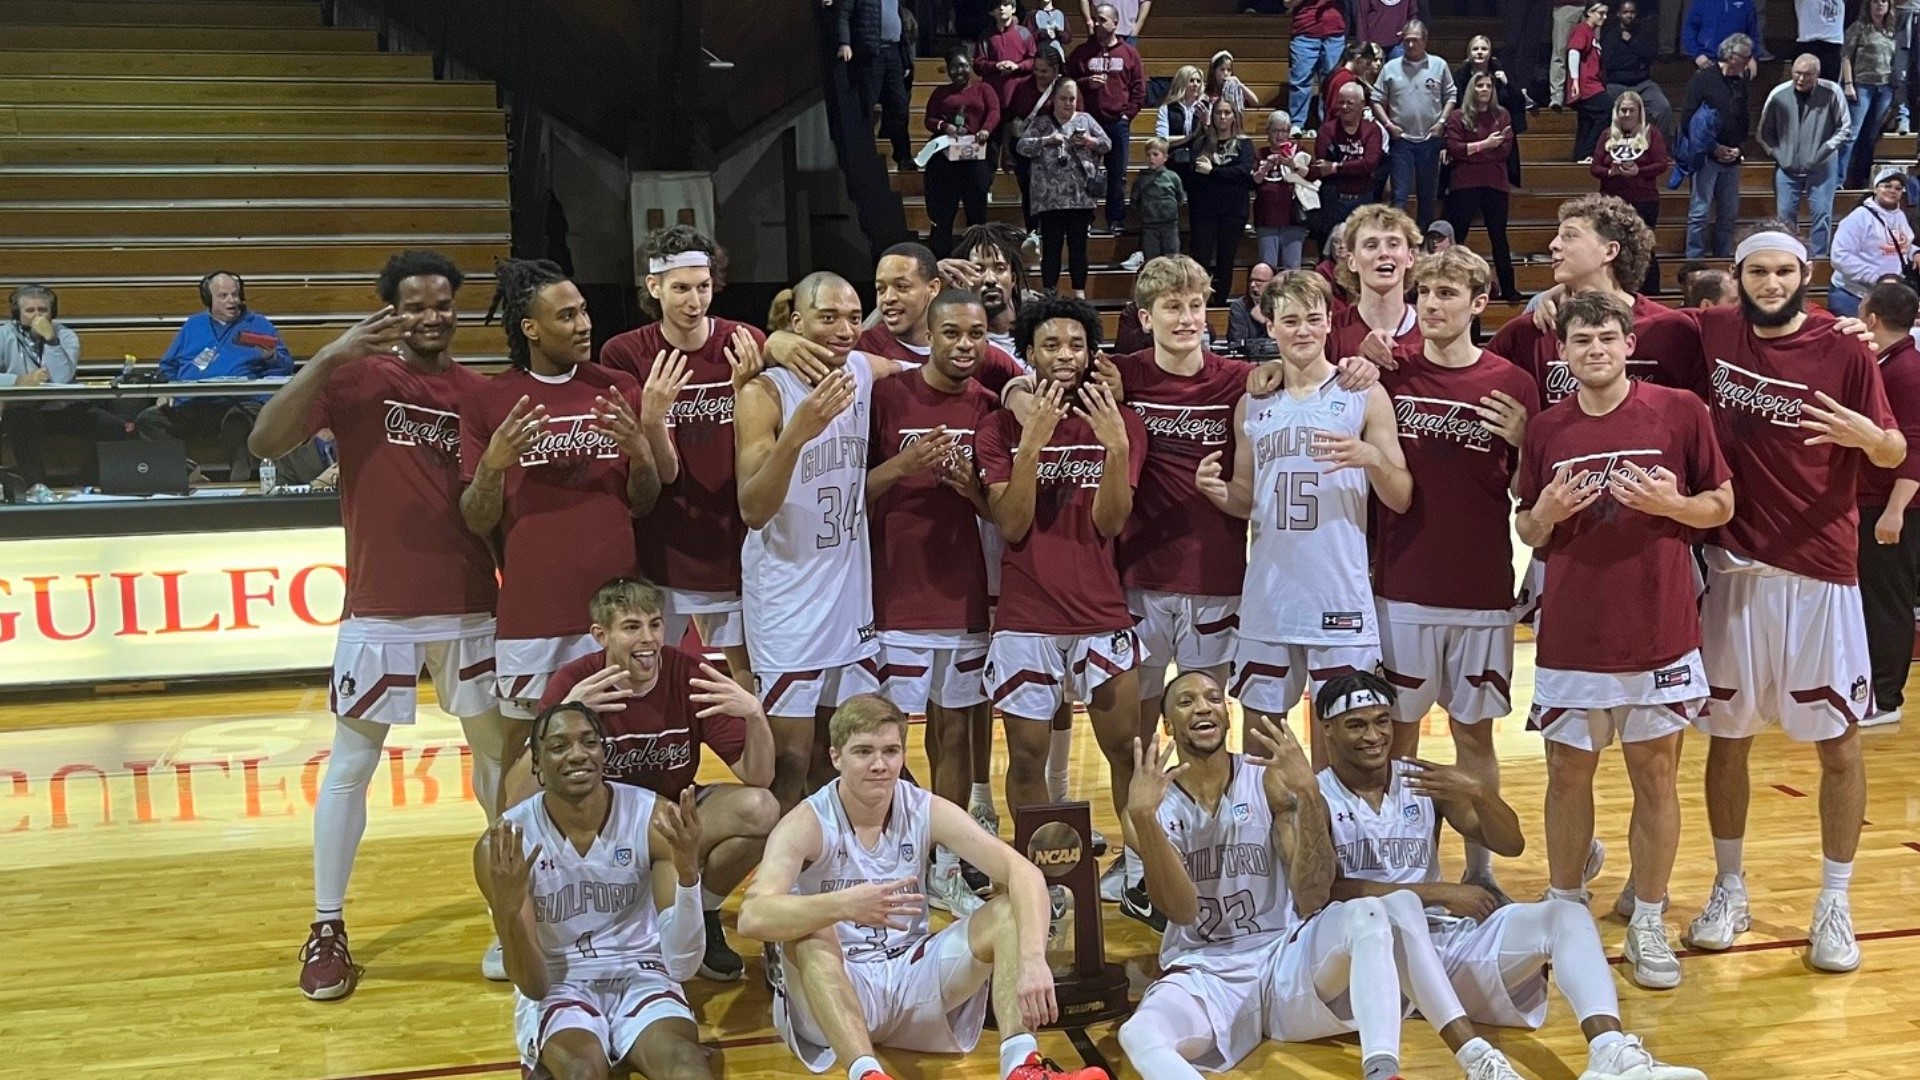 Guilford College is going to the Final Four for Division 3.